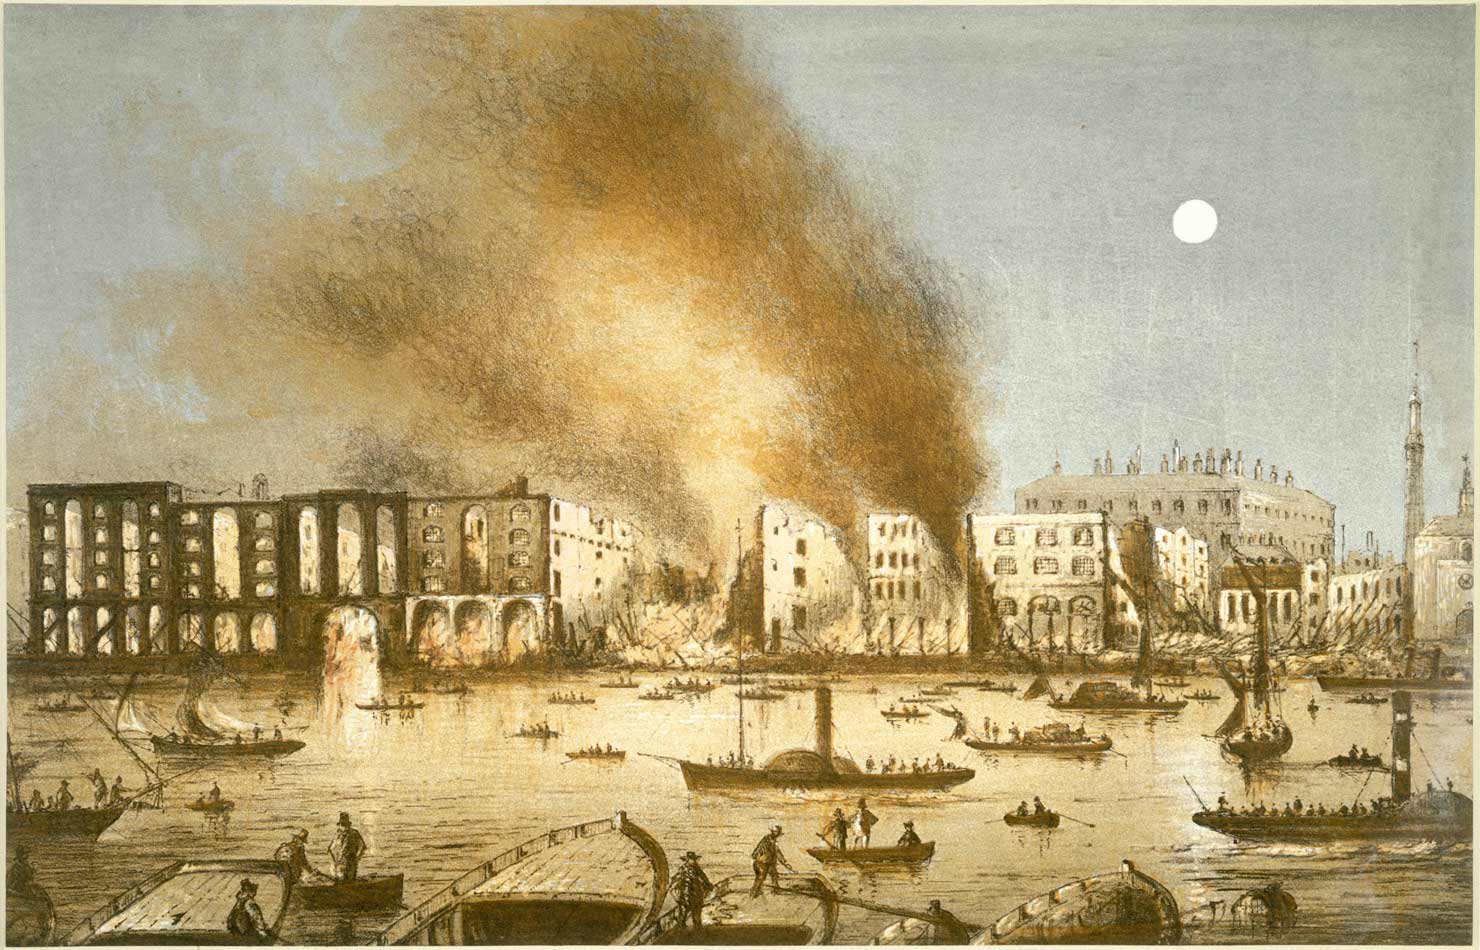 Painting of the Tooley Street Fire.